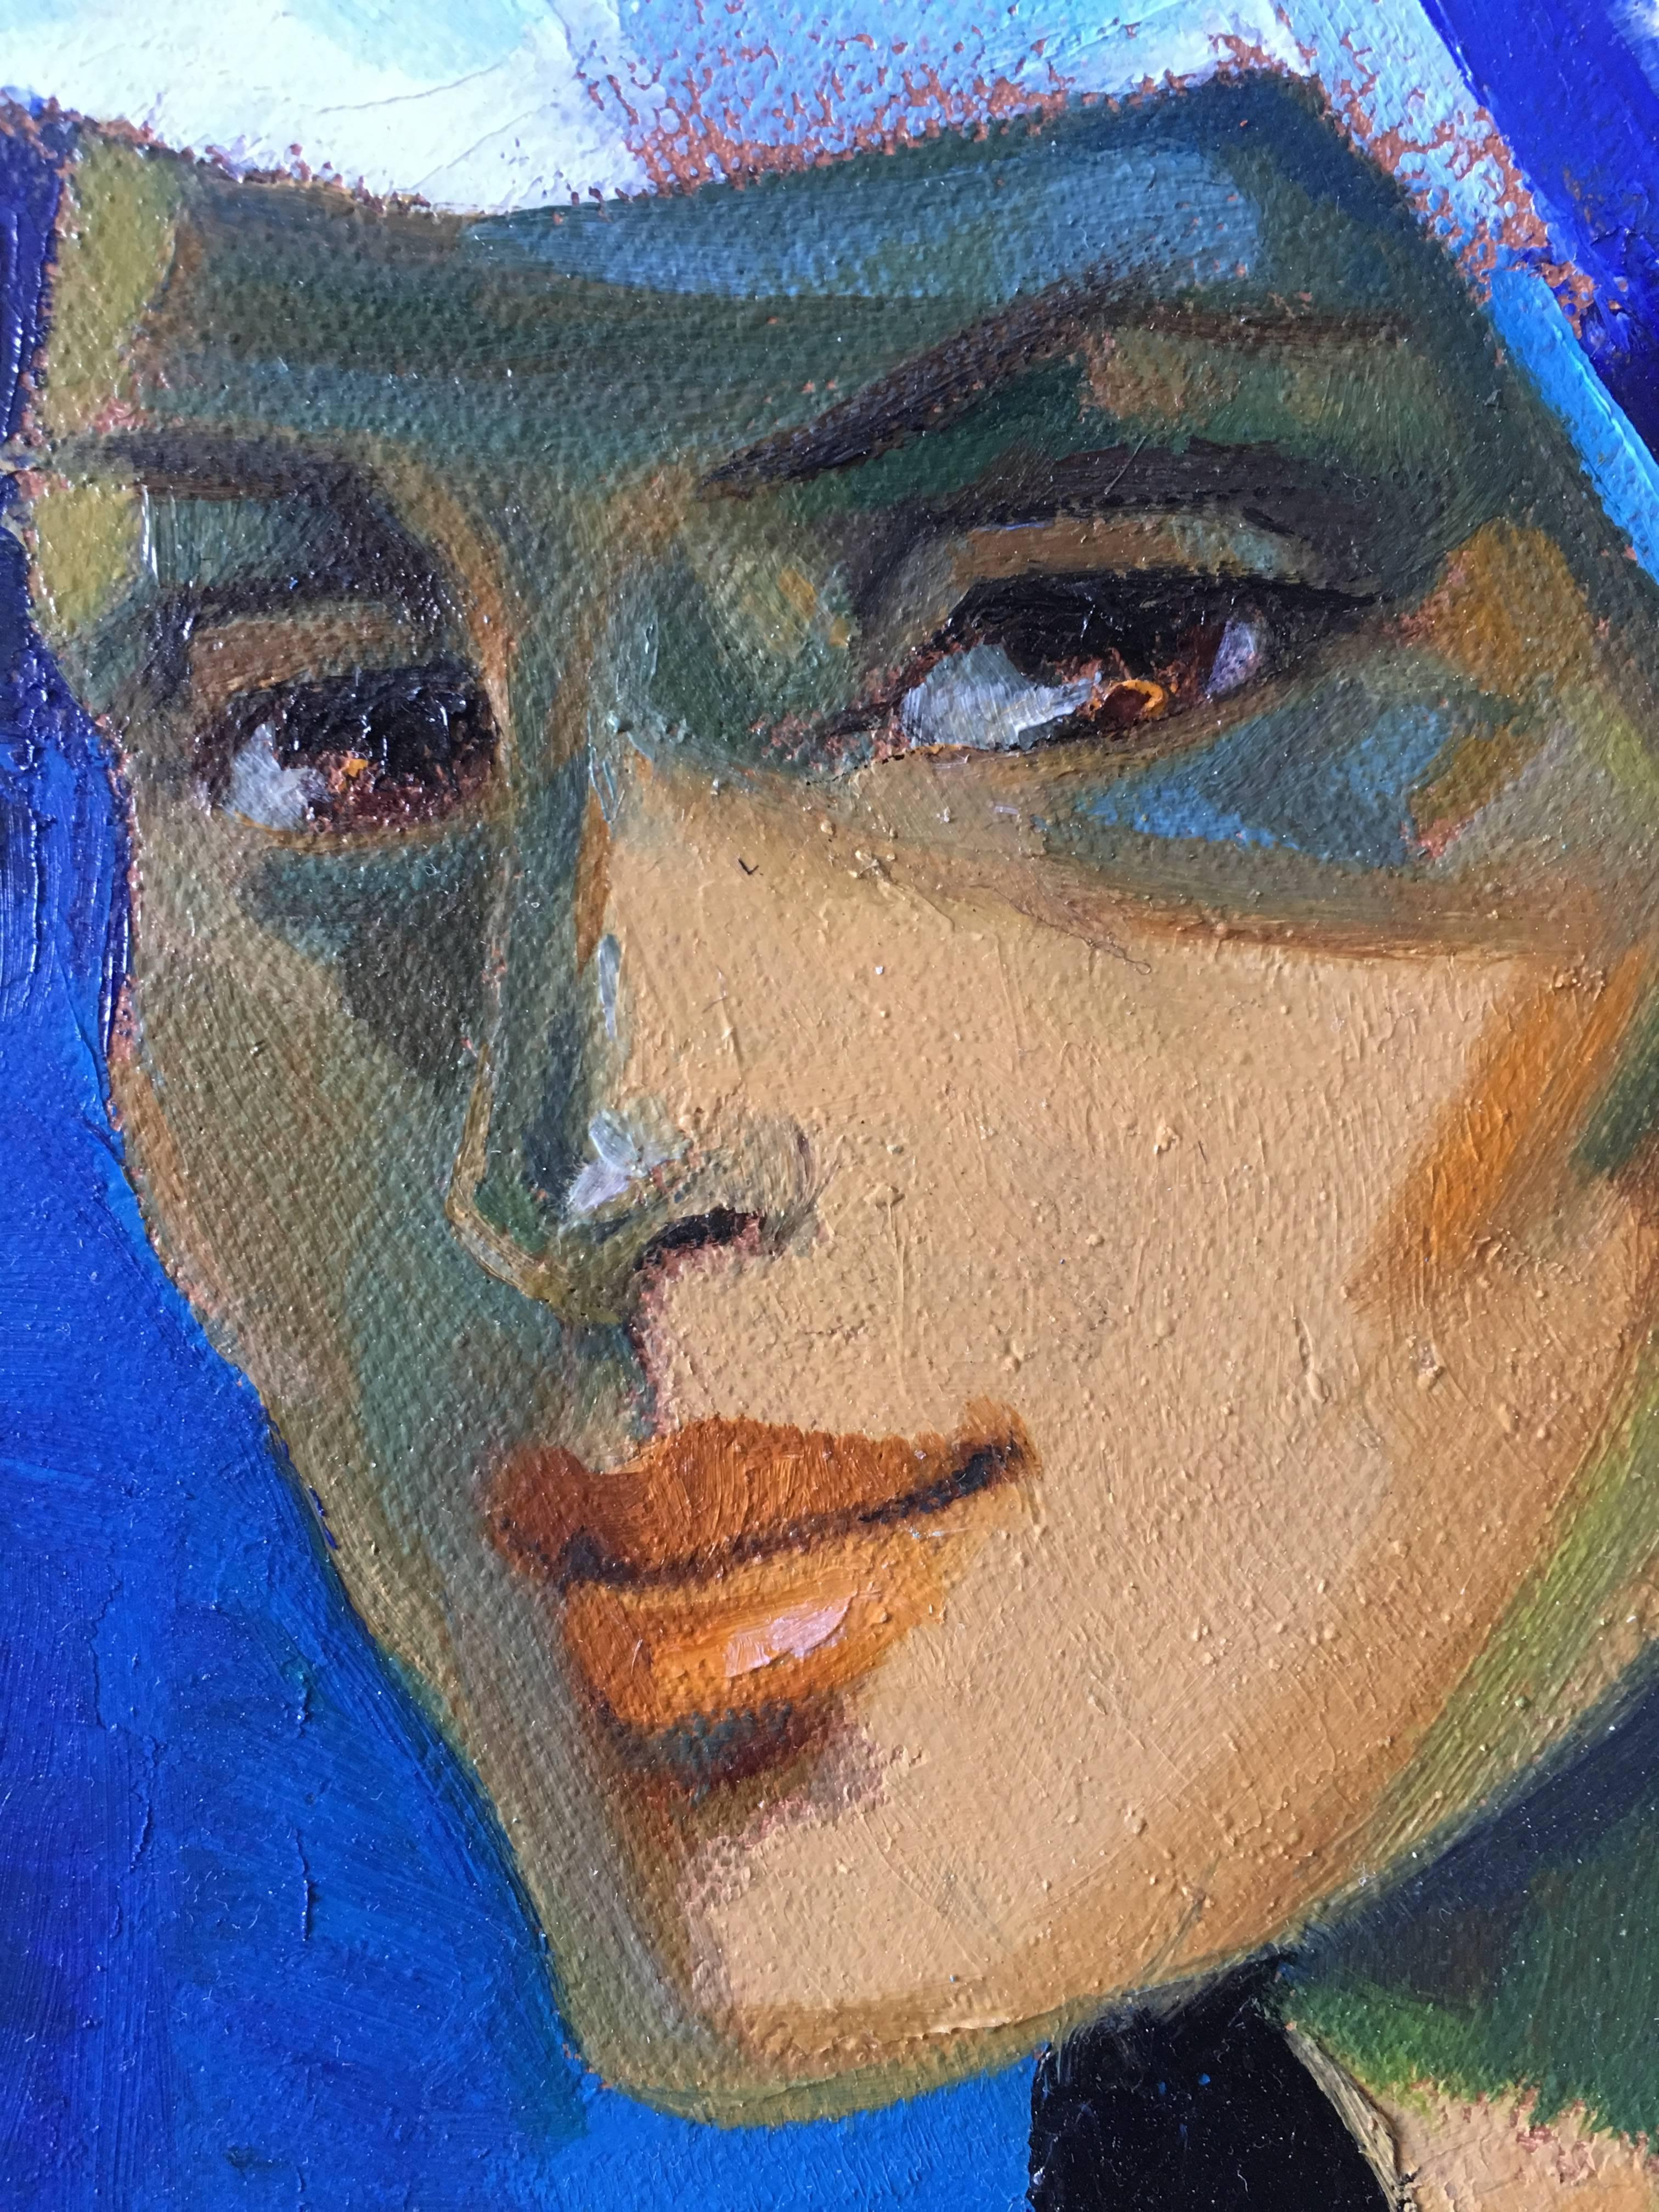 The blue pamela hat, expressionist style  oil painting - Expressionist Painting by Jori Duran